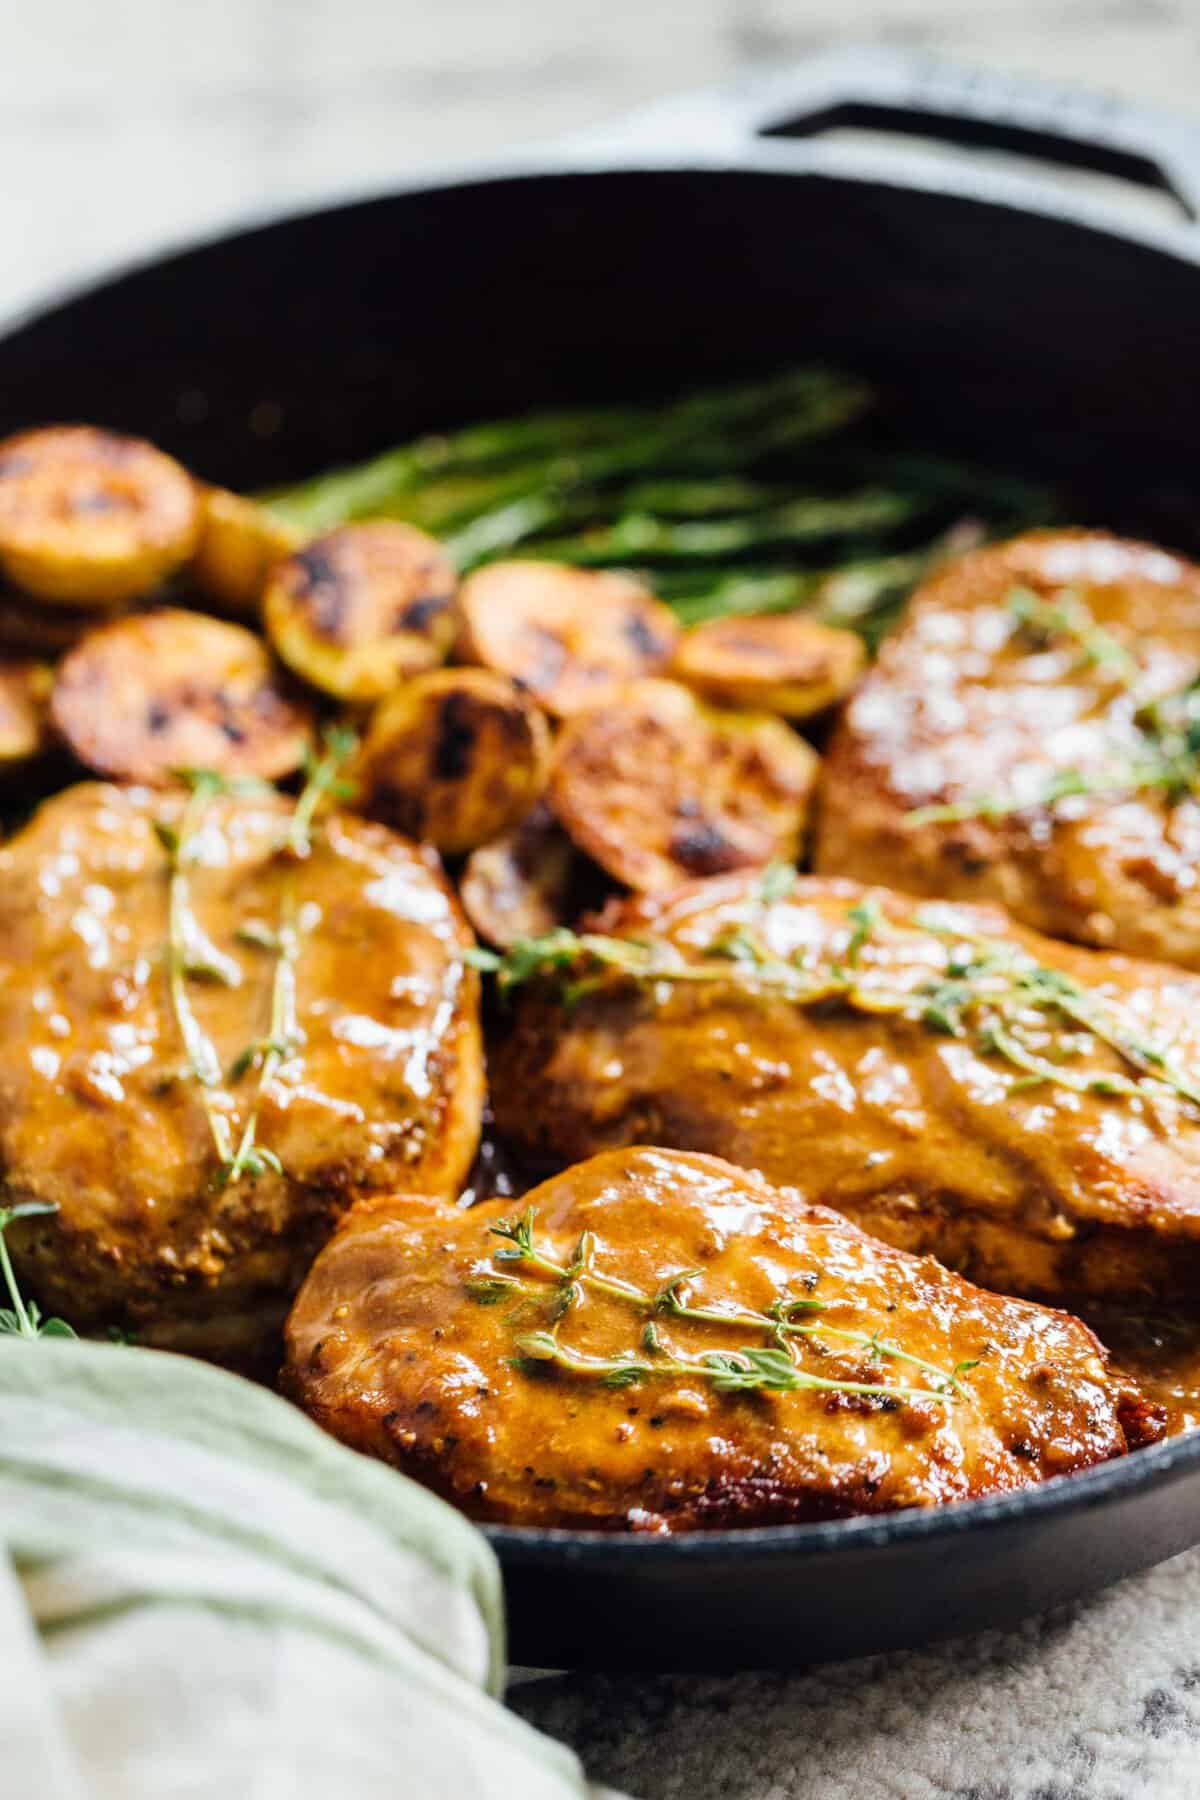 Apricot balsamic pork chops are going to be in your weeknight dinner rotation after your first bite of this sweet and tangy dish! #apricotbalsamic #apricot #porkchops #quickdinner #easydinner #skilletdinner